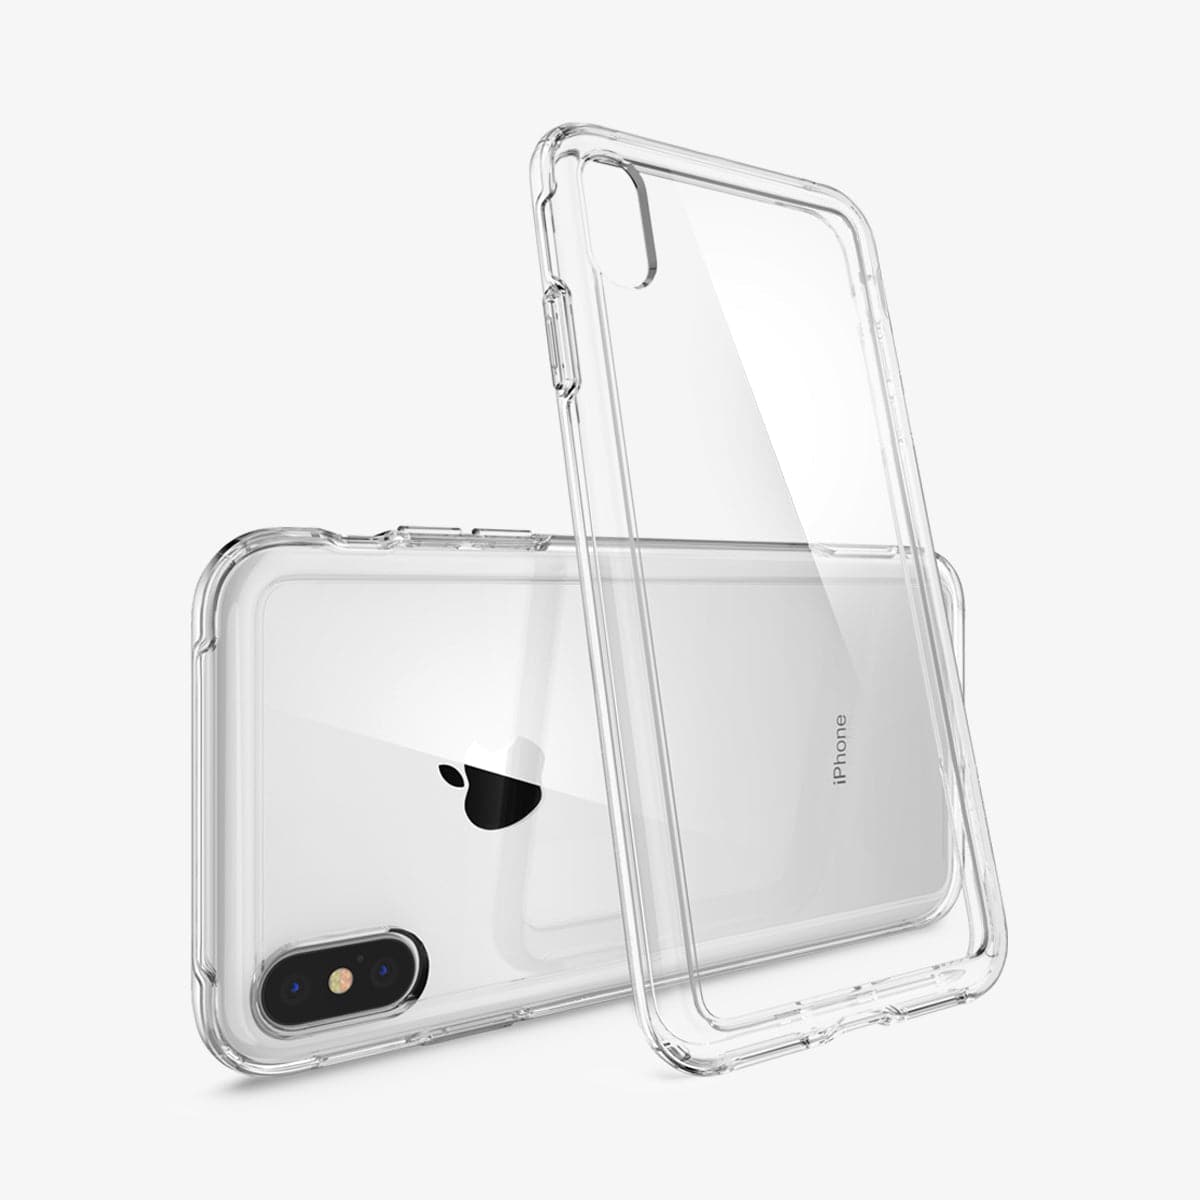 Spigen [Spigen] iPhone XS Case/iPhone X Case 5.8-inch Compatible Full Clear  Shock Resistant US Military MIL Standard Obtained Ultra Hybrid 057CS22127  (Crystal Clear) 